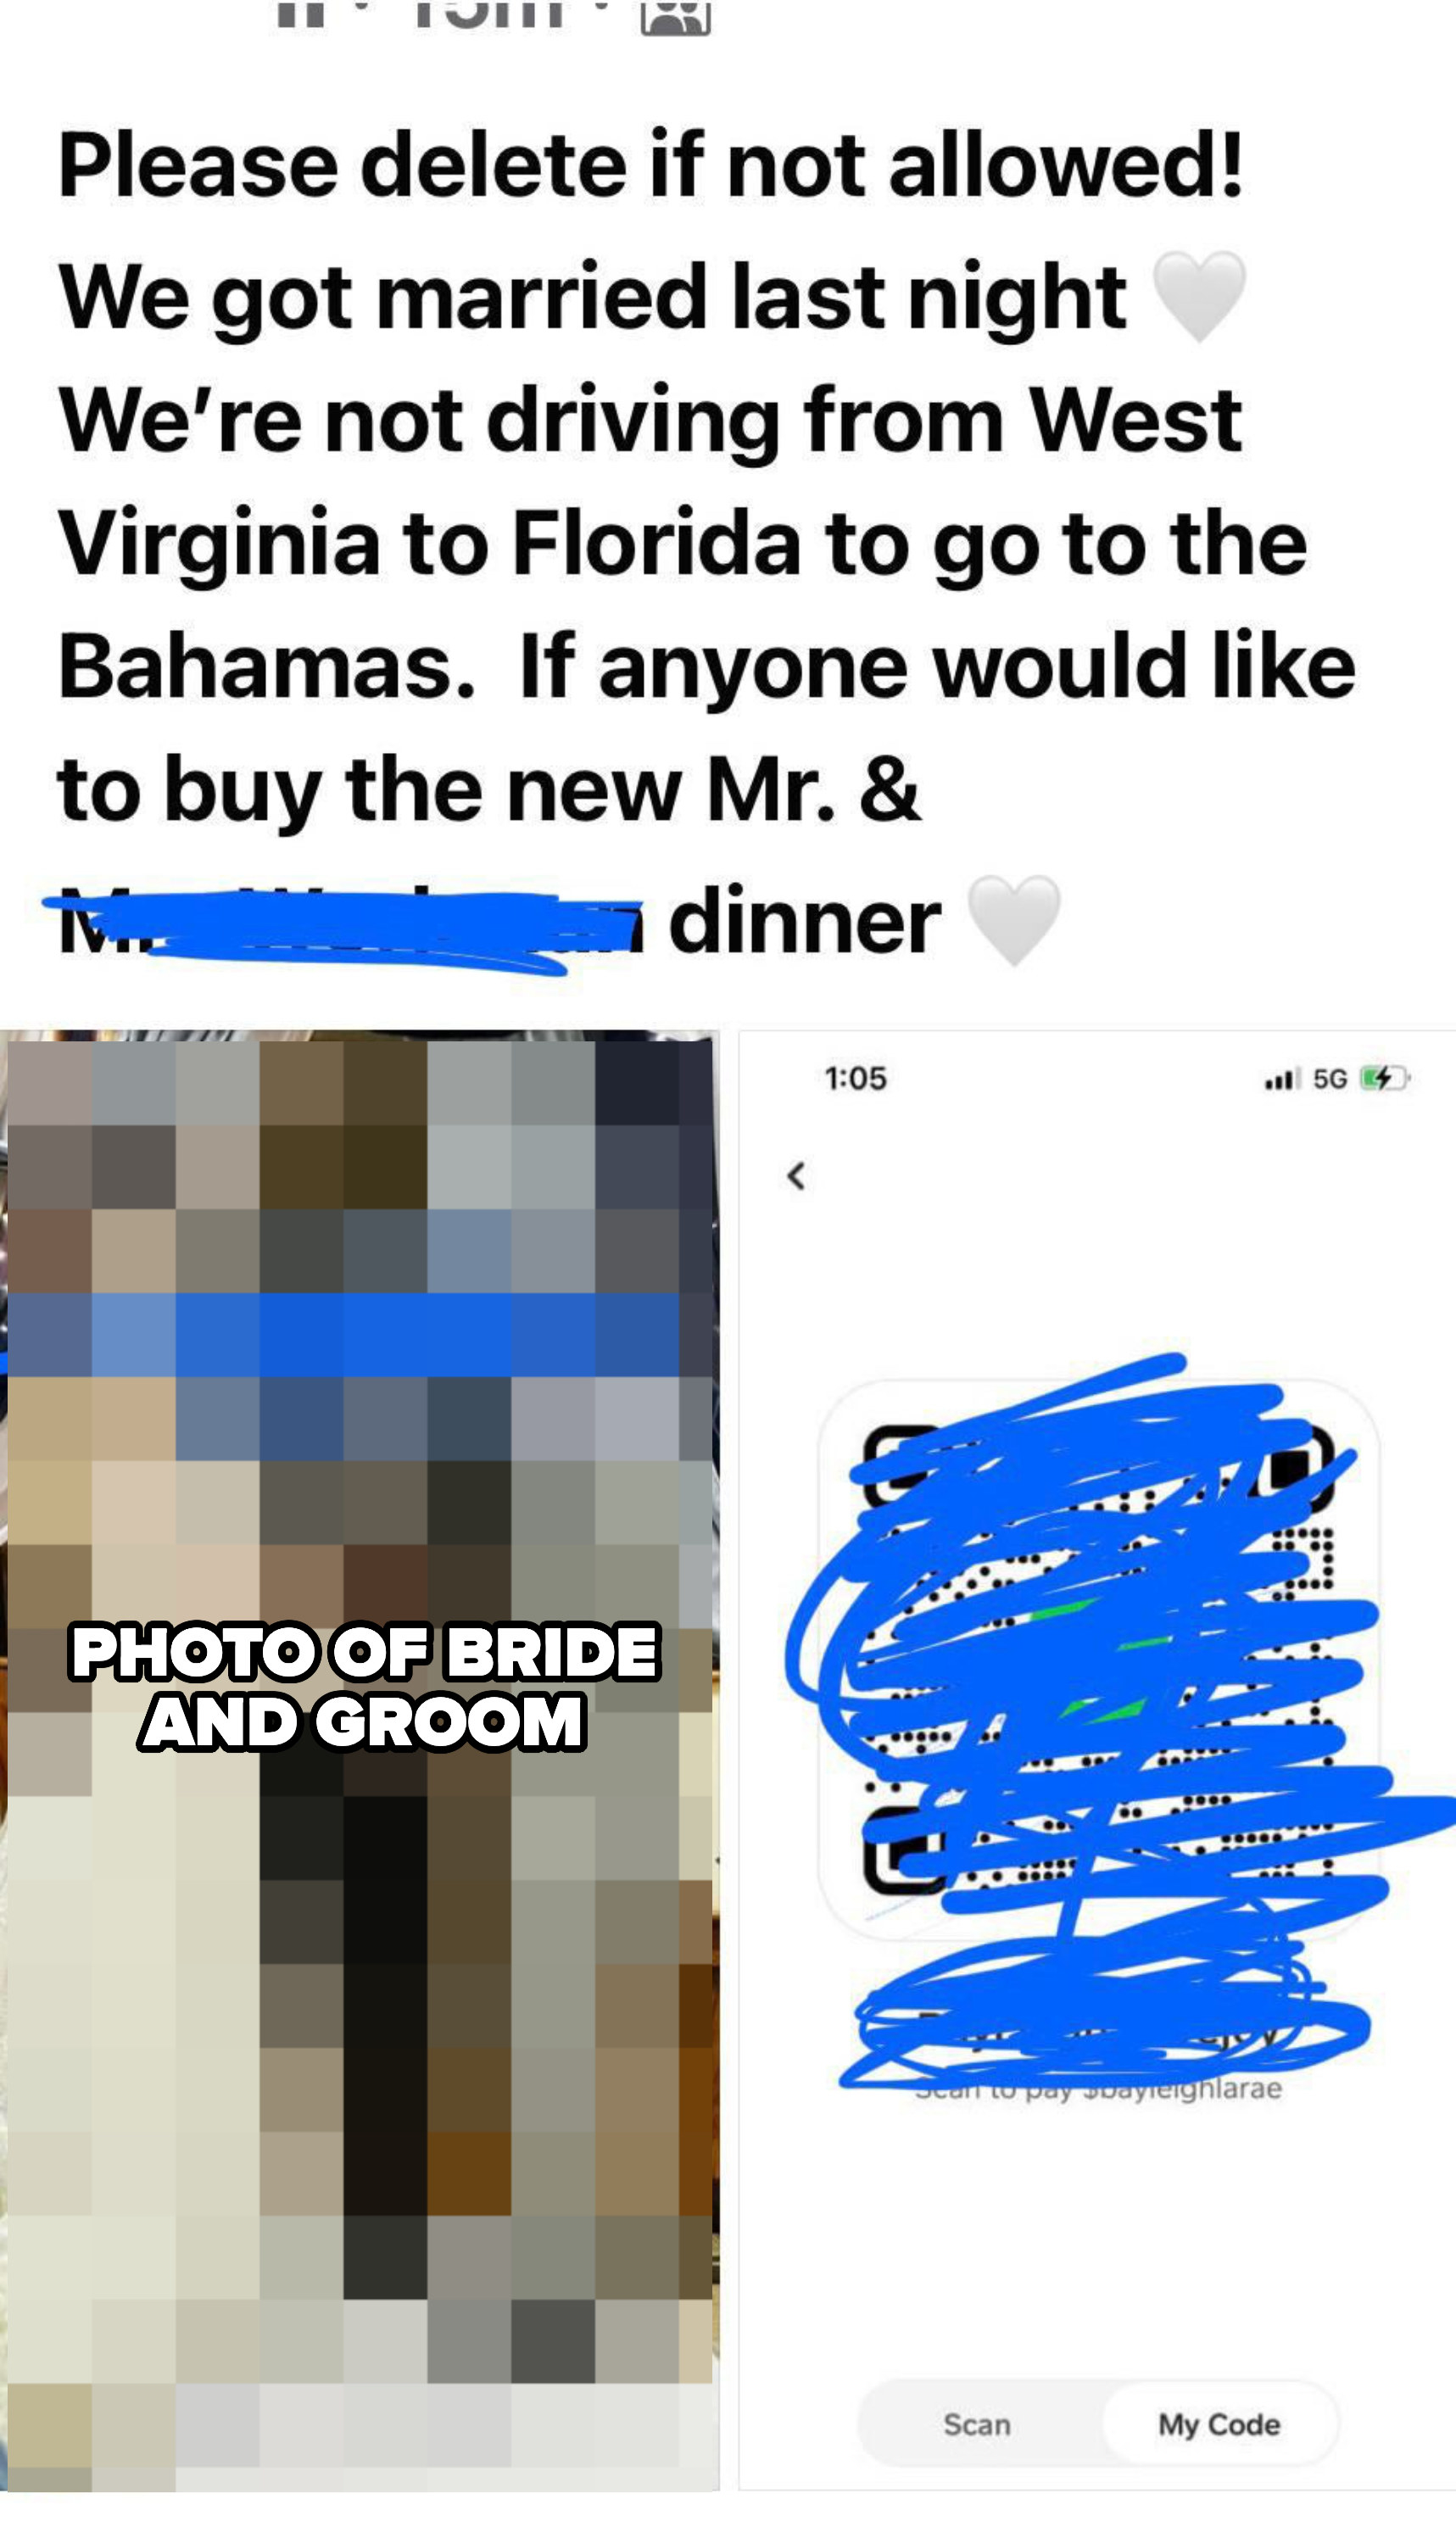 picture of the bride and groom getting married and then a QR code to send money